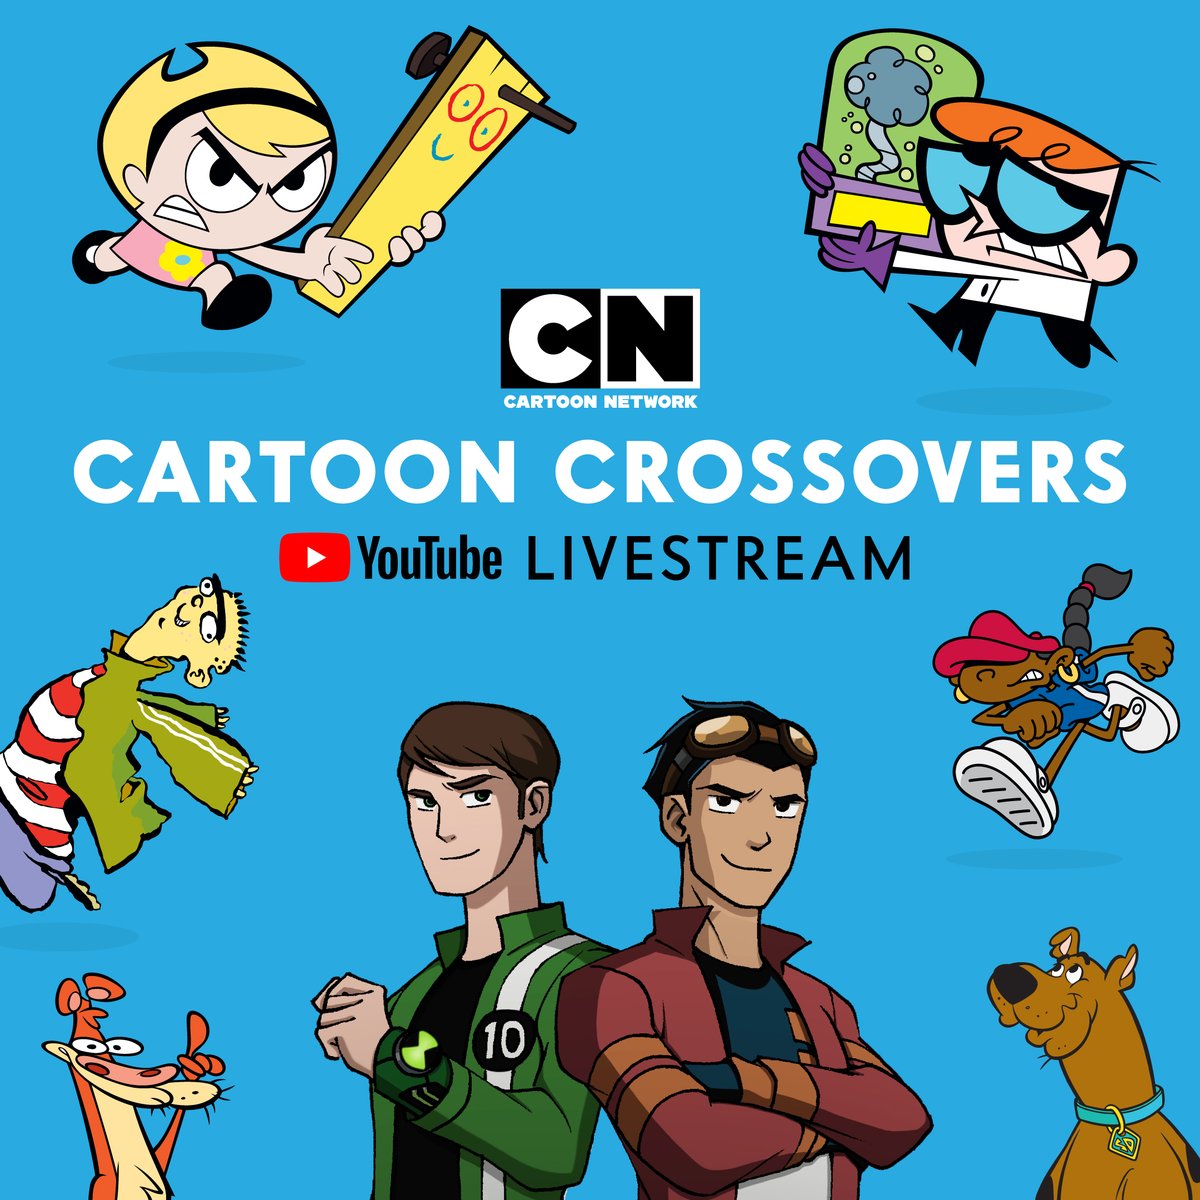 Your favorite Cartoon worlds collide in our Crossover Episodes Livestream! ⬜️⬛️ WATCH NOW on Youtube  👉 cartn.co/CrossoverLS

#CartoonNetwork #YoutubeLive  #Oldschool #Classiccartooons #90scartoons #2000scartoons #crossover #classiccartoons #throwback #backintheday